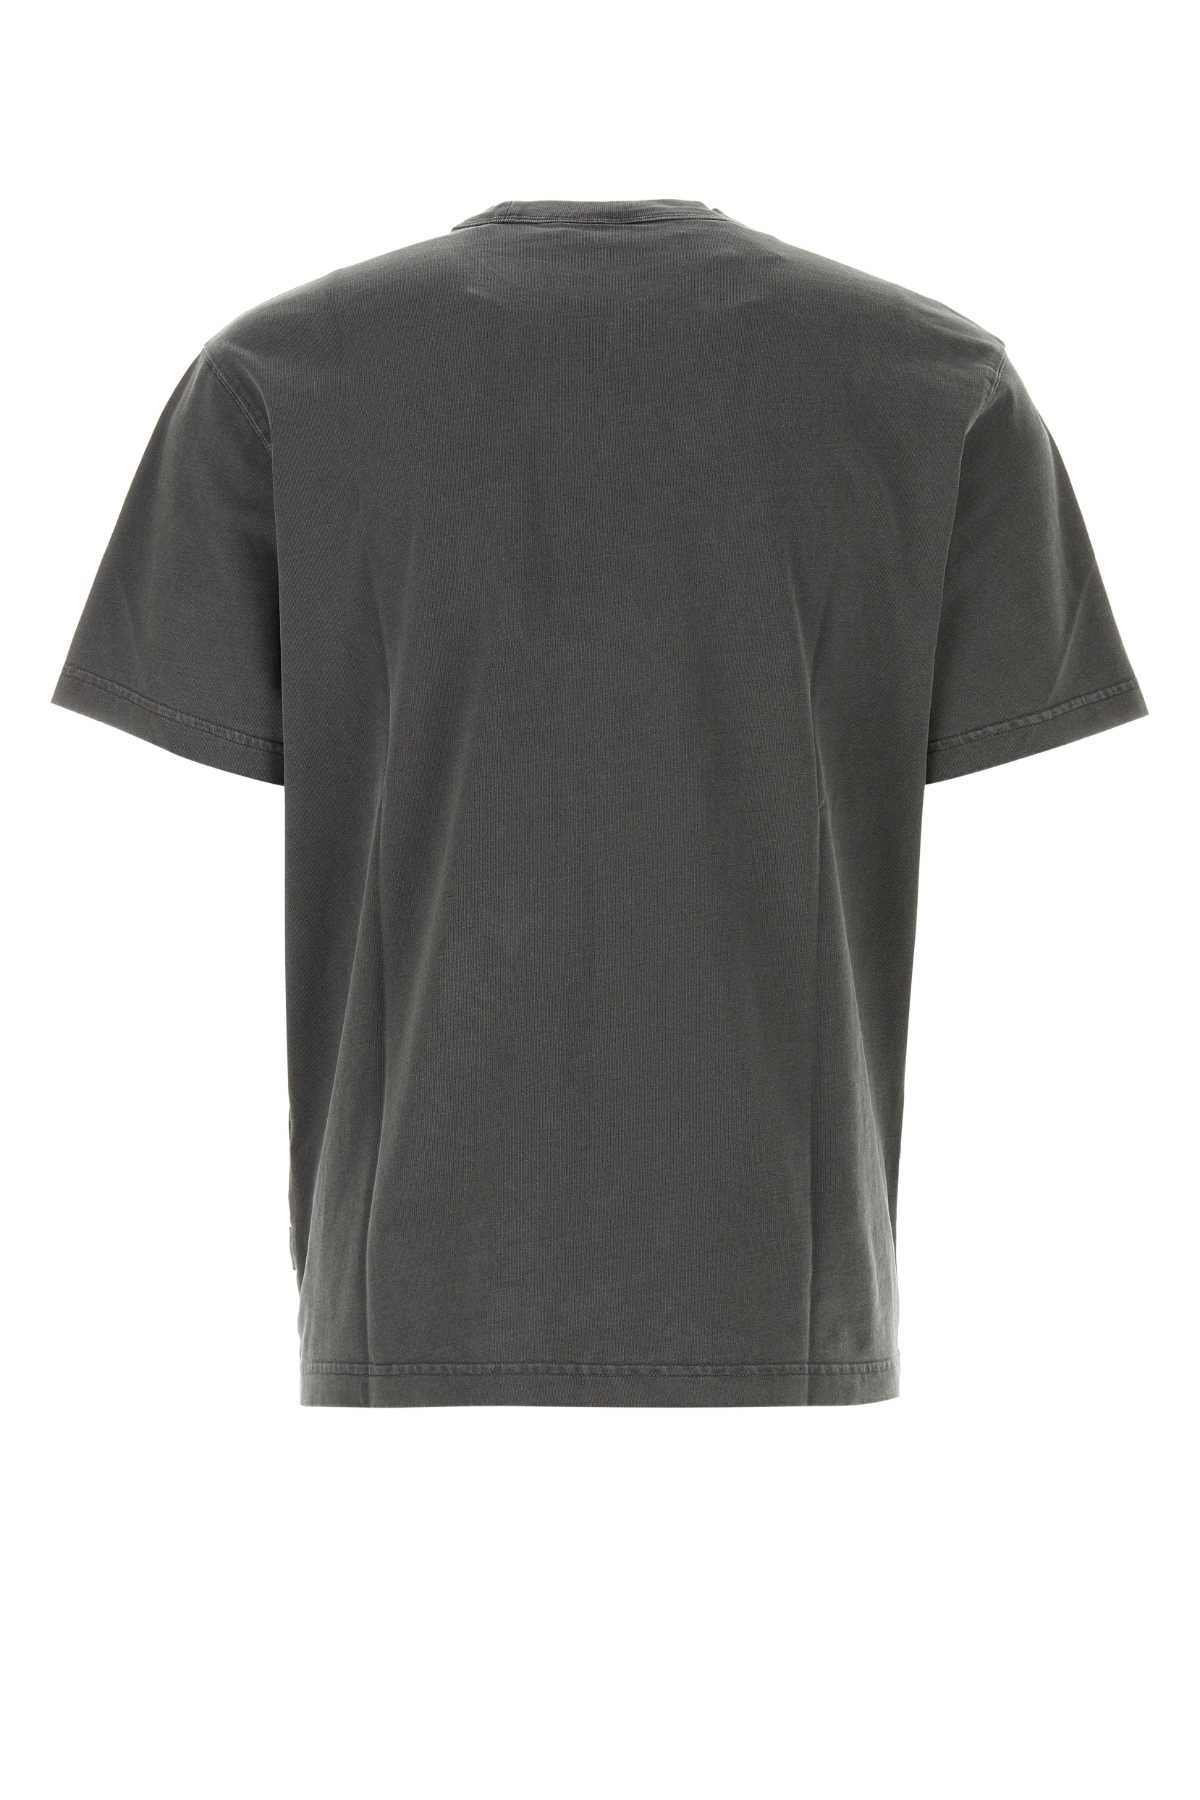 Carhartt Graphite Cotton S/s Taos T-shirt In Blk